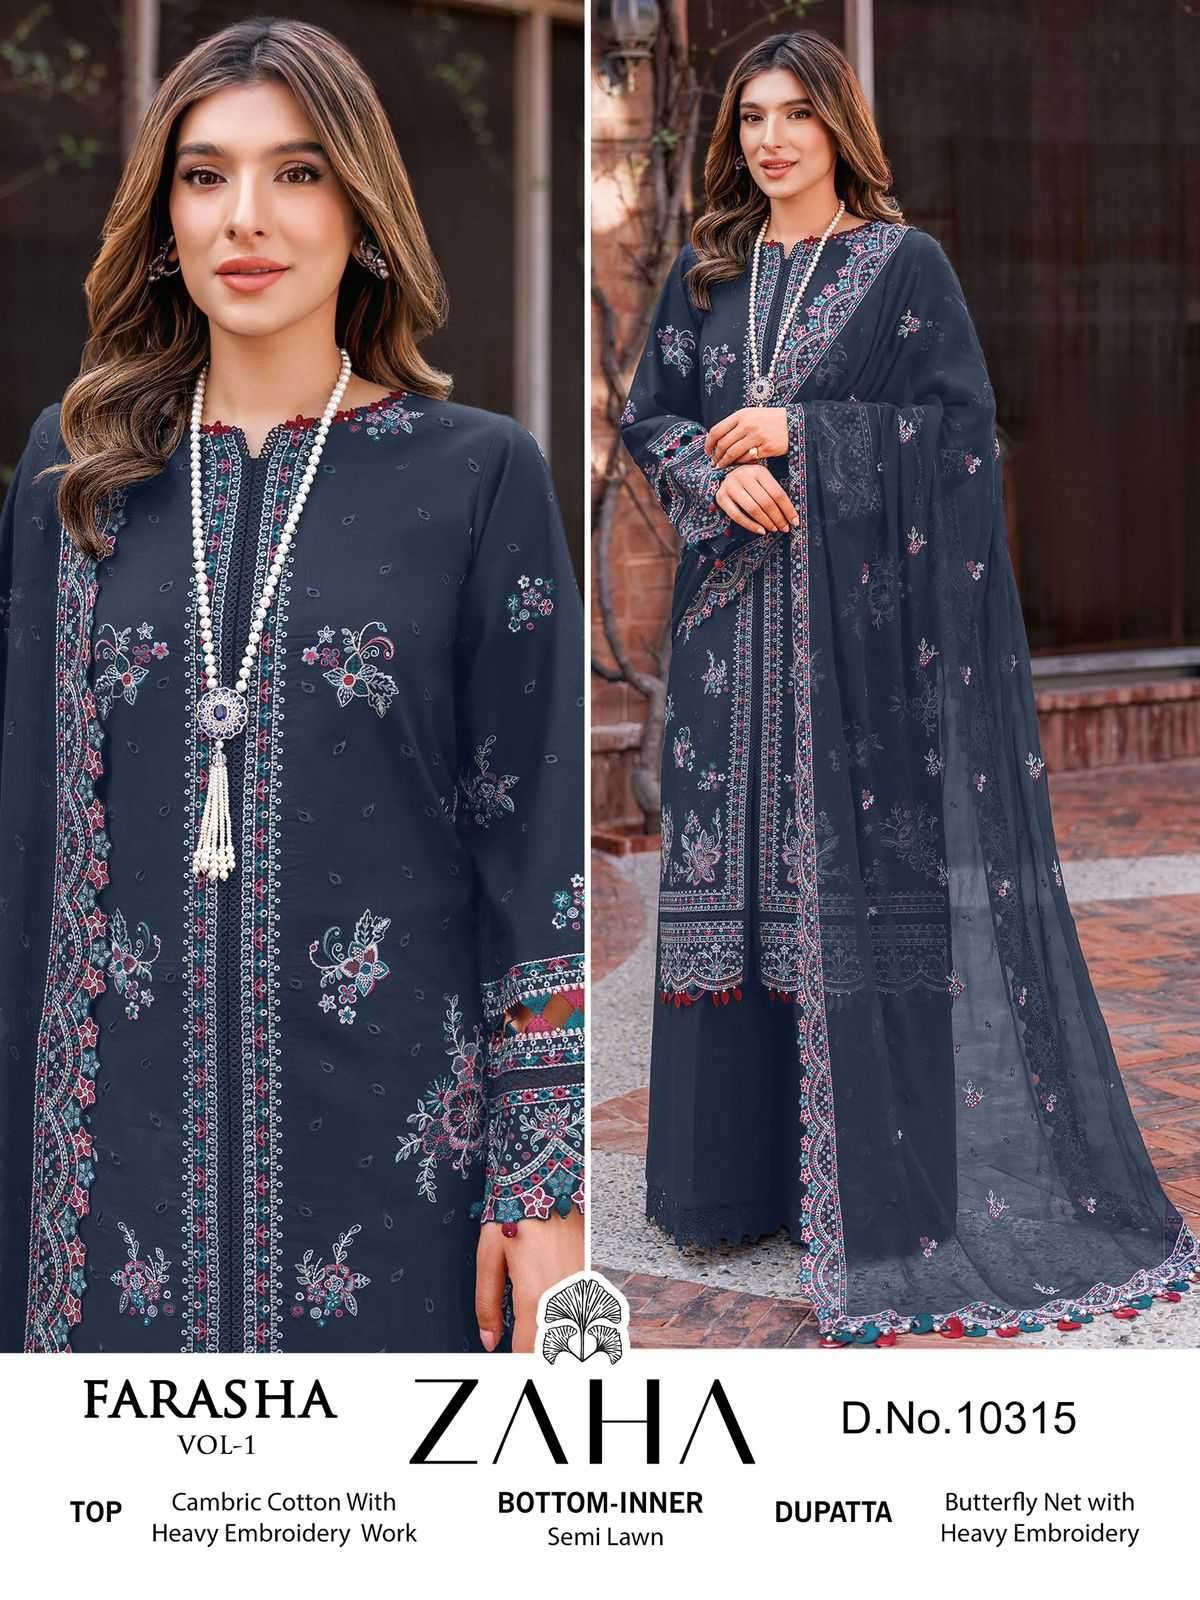 FARASHA VOL-1 SERIES 10314 TO 10317 BY ZAHA DESIGNER WITH WORK CAMBRIC COTTON PAKISTANI STYLE SUITS ARE AVAILABLE AT WHOLESALE PRICE